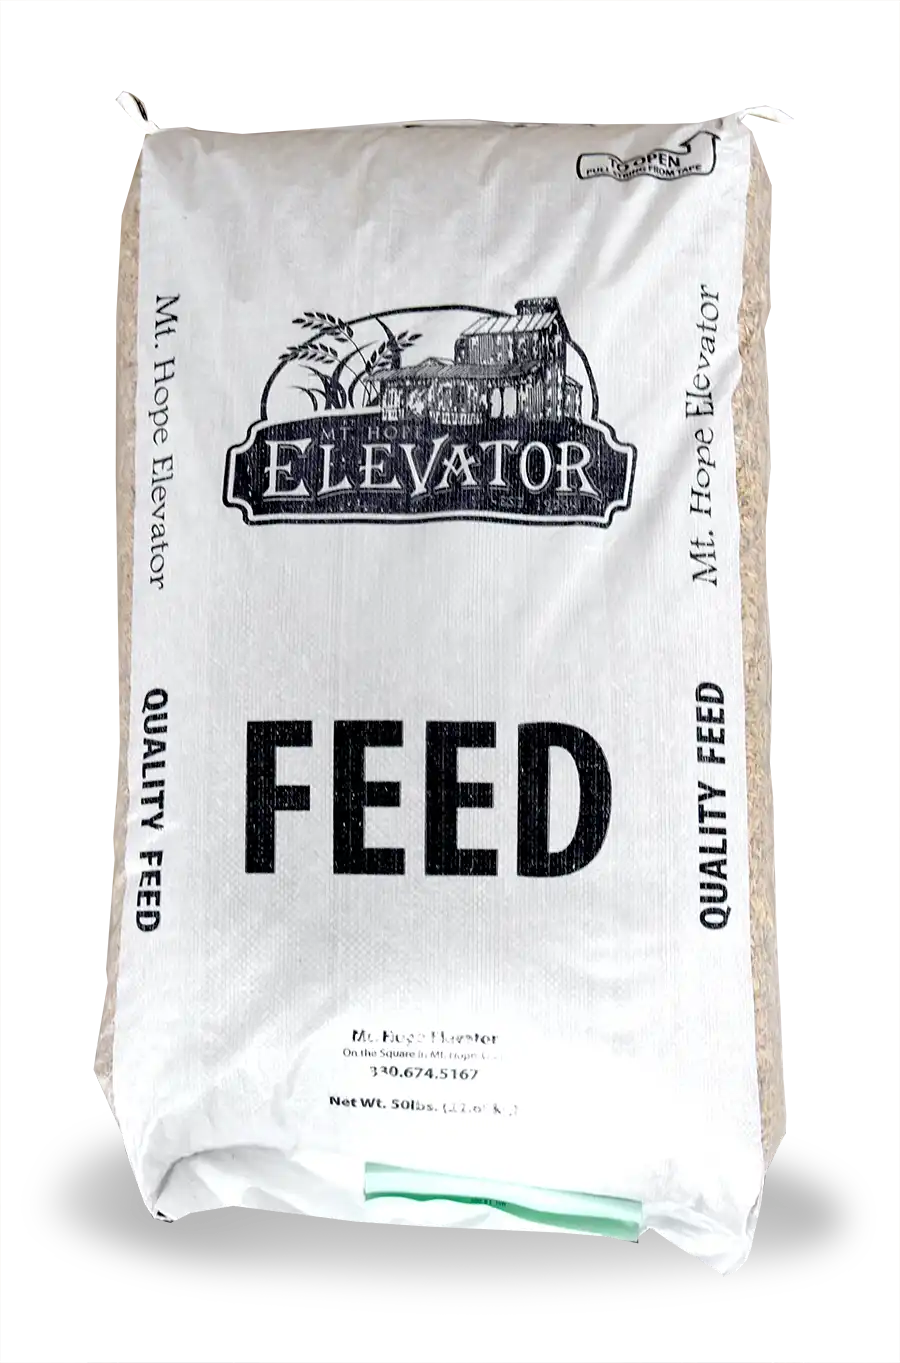 Related product - Mt. Hope Elevator Canadian Oats